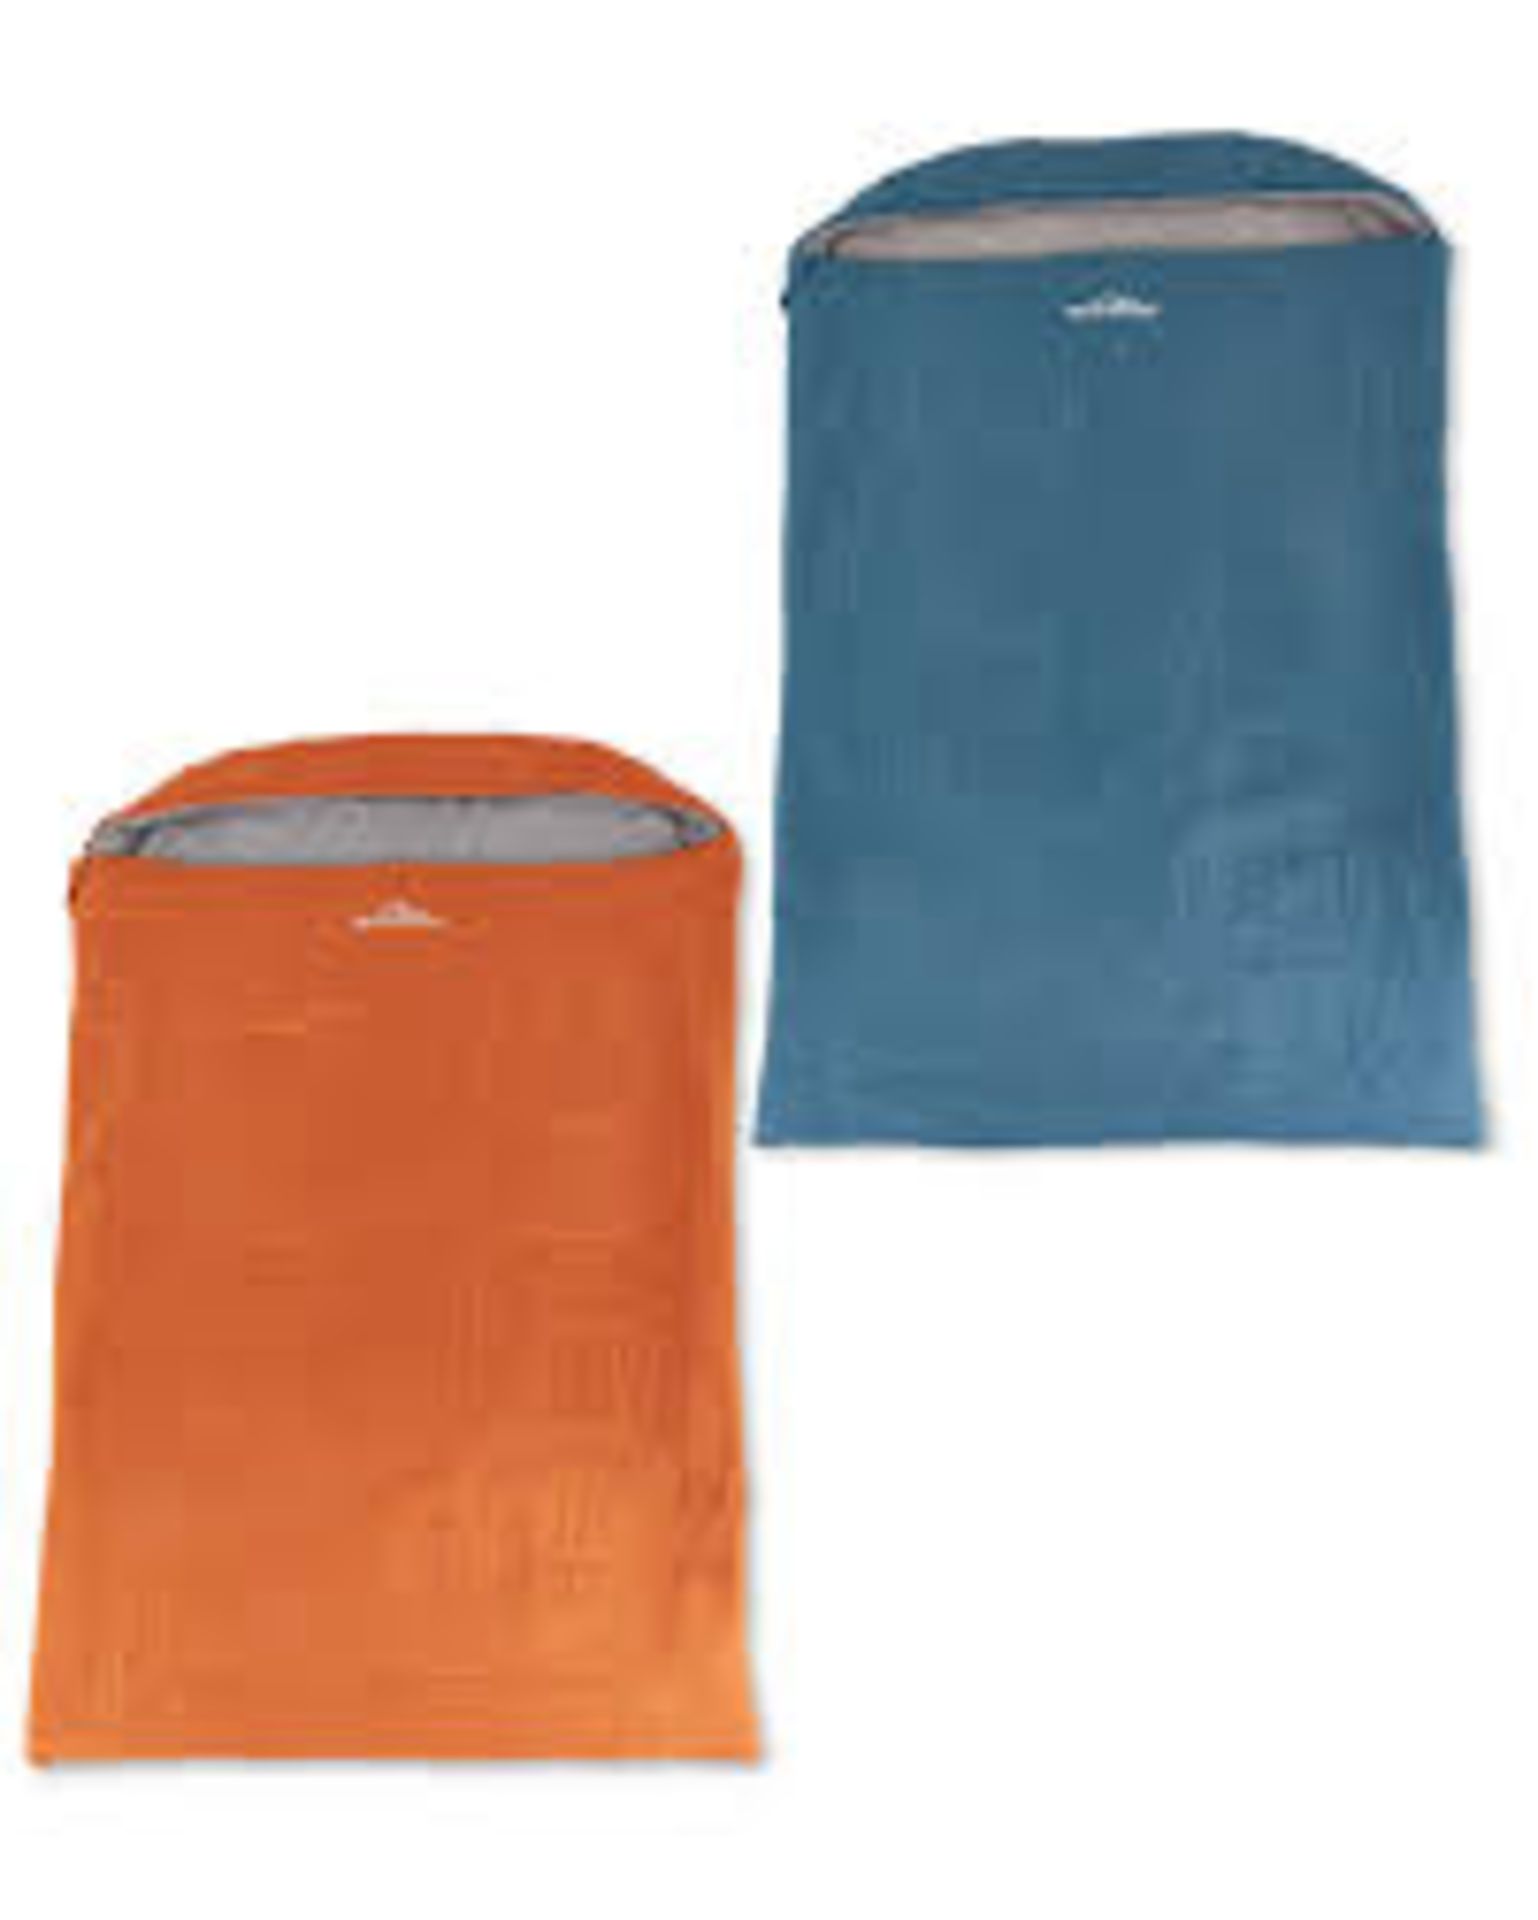 Adventuridge Double Sleeping Bag RRP £35 (Public Viewing and Appraisals Available)